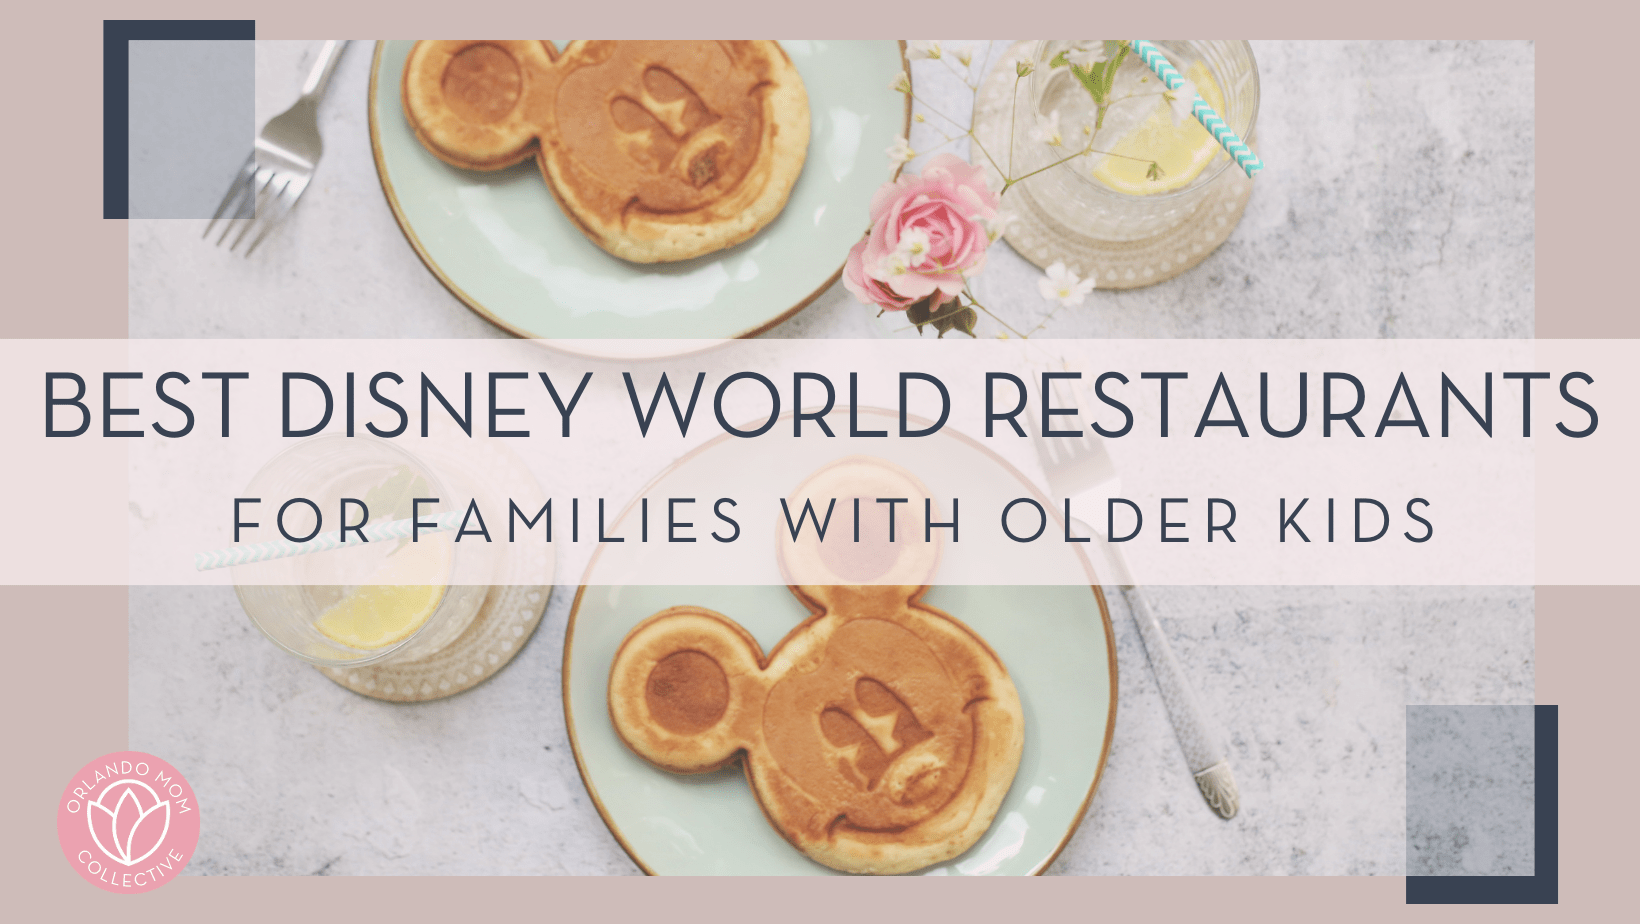 andrijana bozic unsplash image of mickey shaped pancakes and smoothies with words 'best Disney World restaurants for families with older kids' over top of picture.